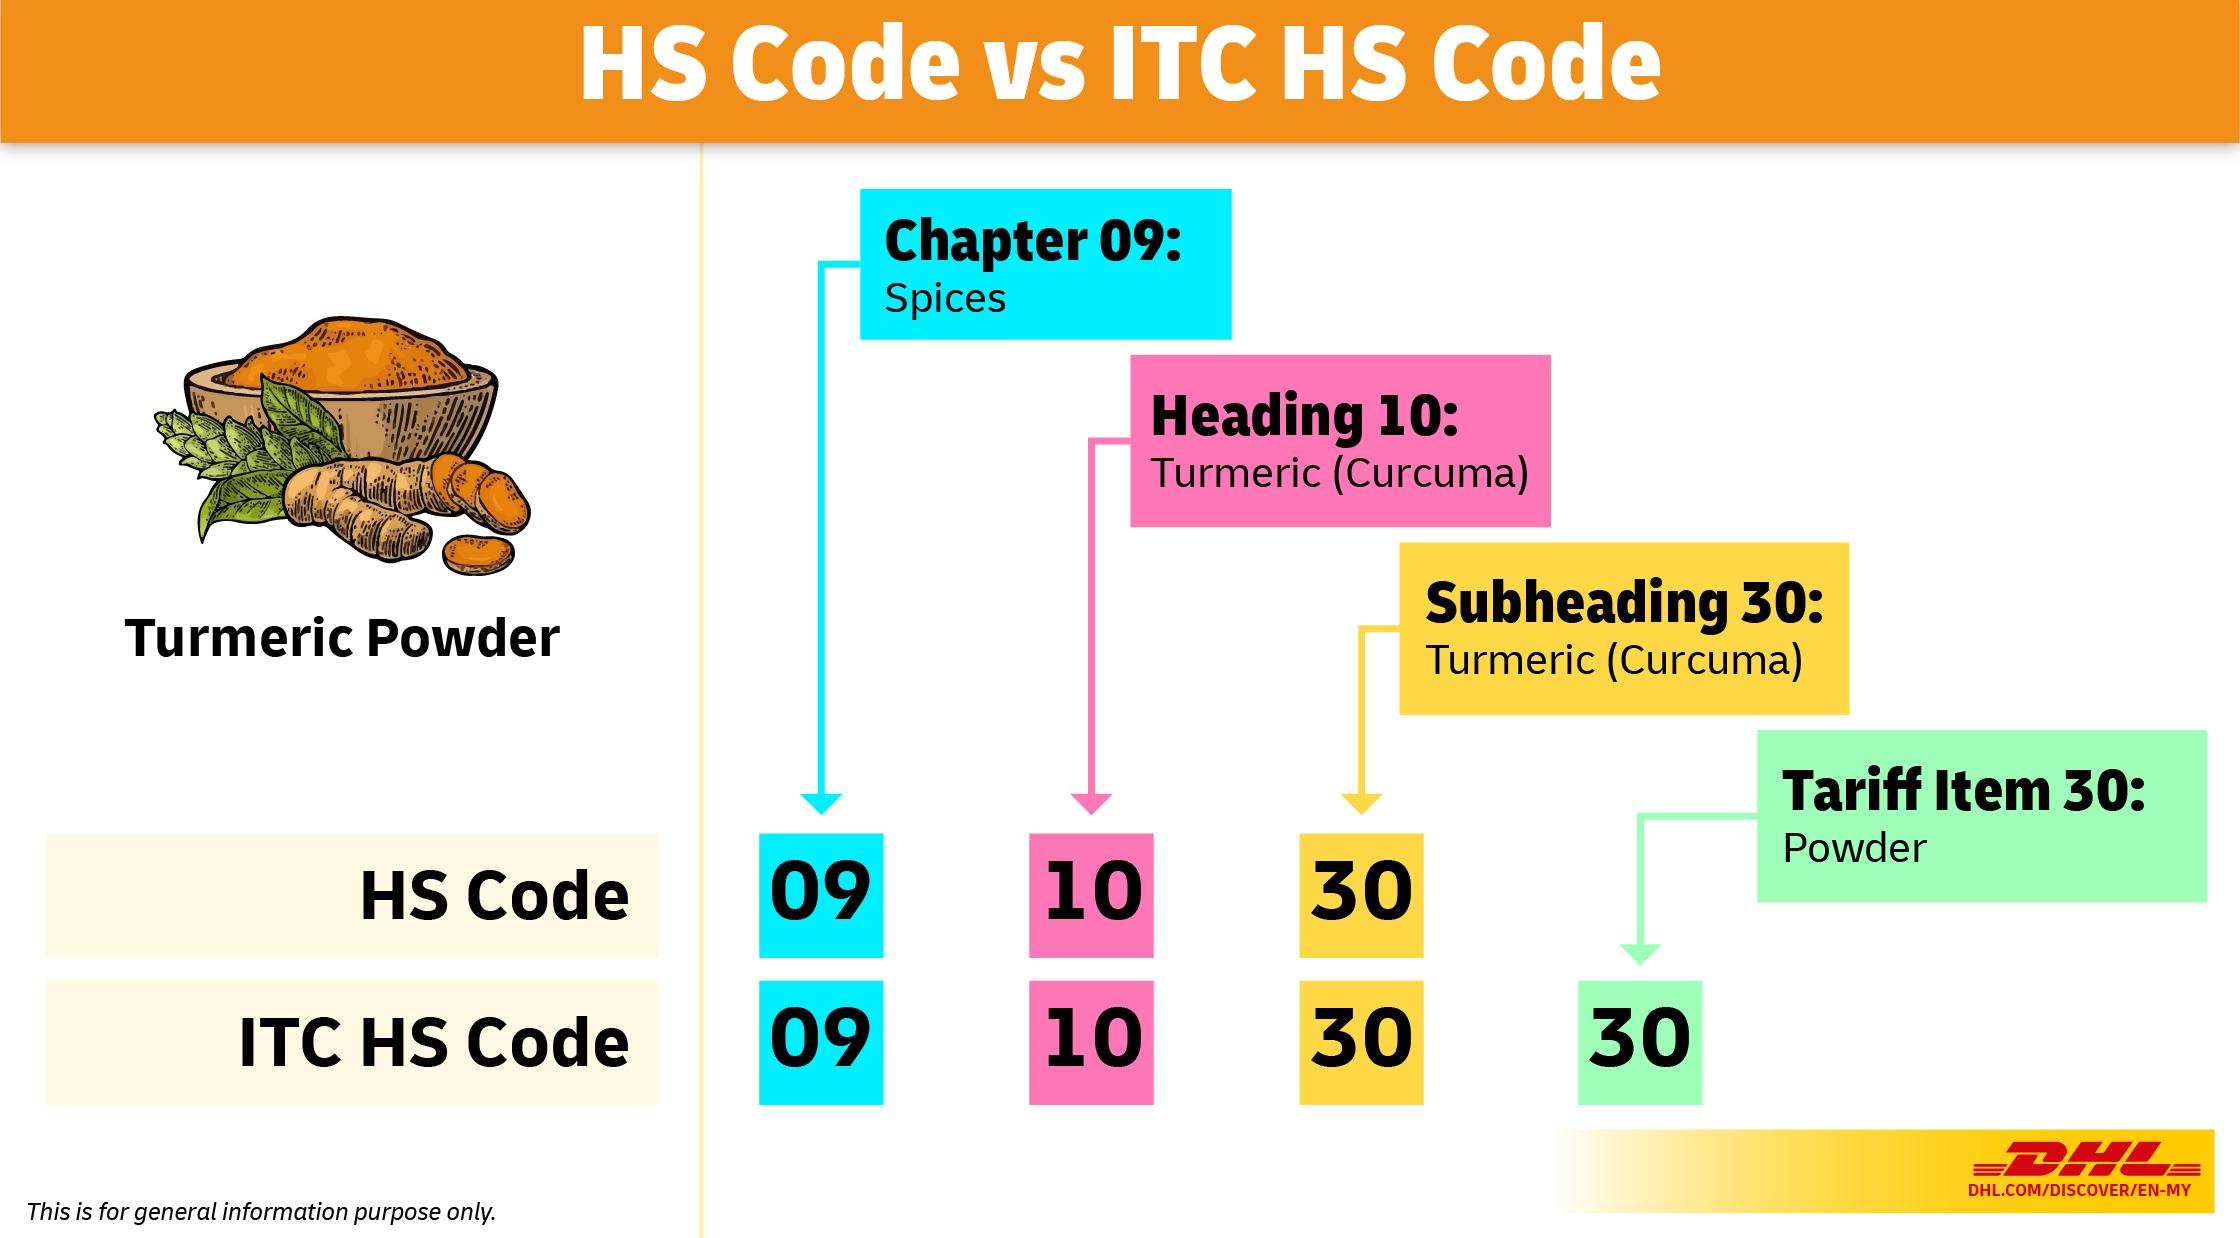 Tumeric powder of HS code has 6 digits and ITC HS Code has 8 digits